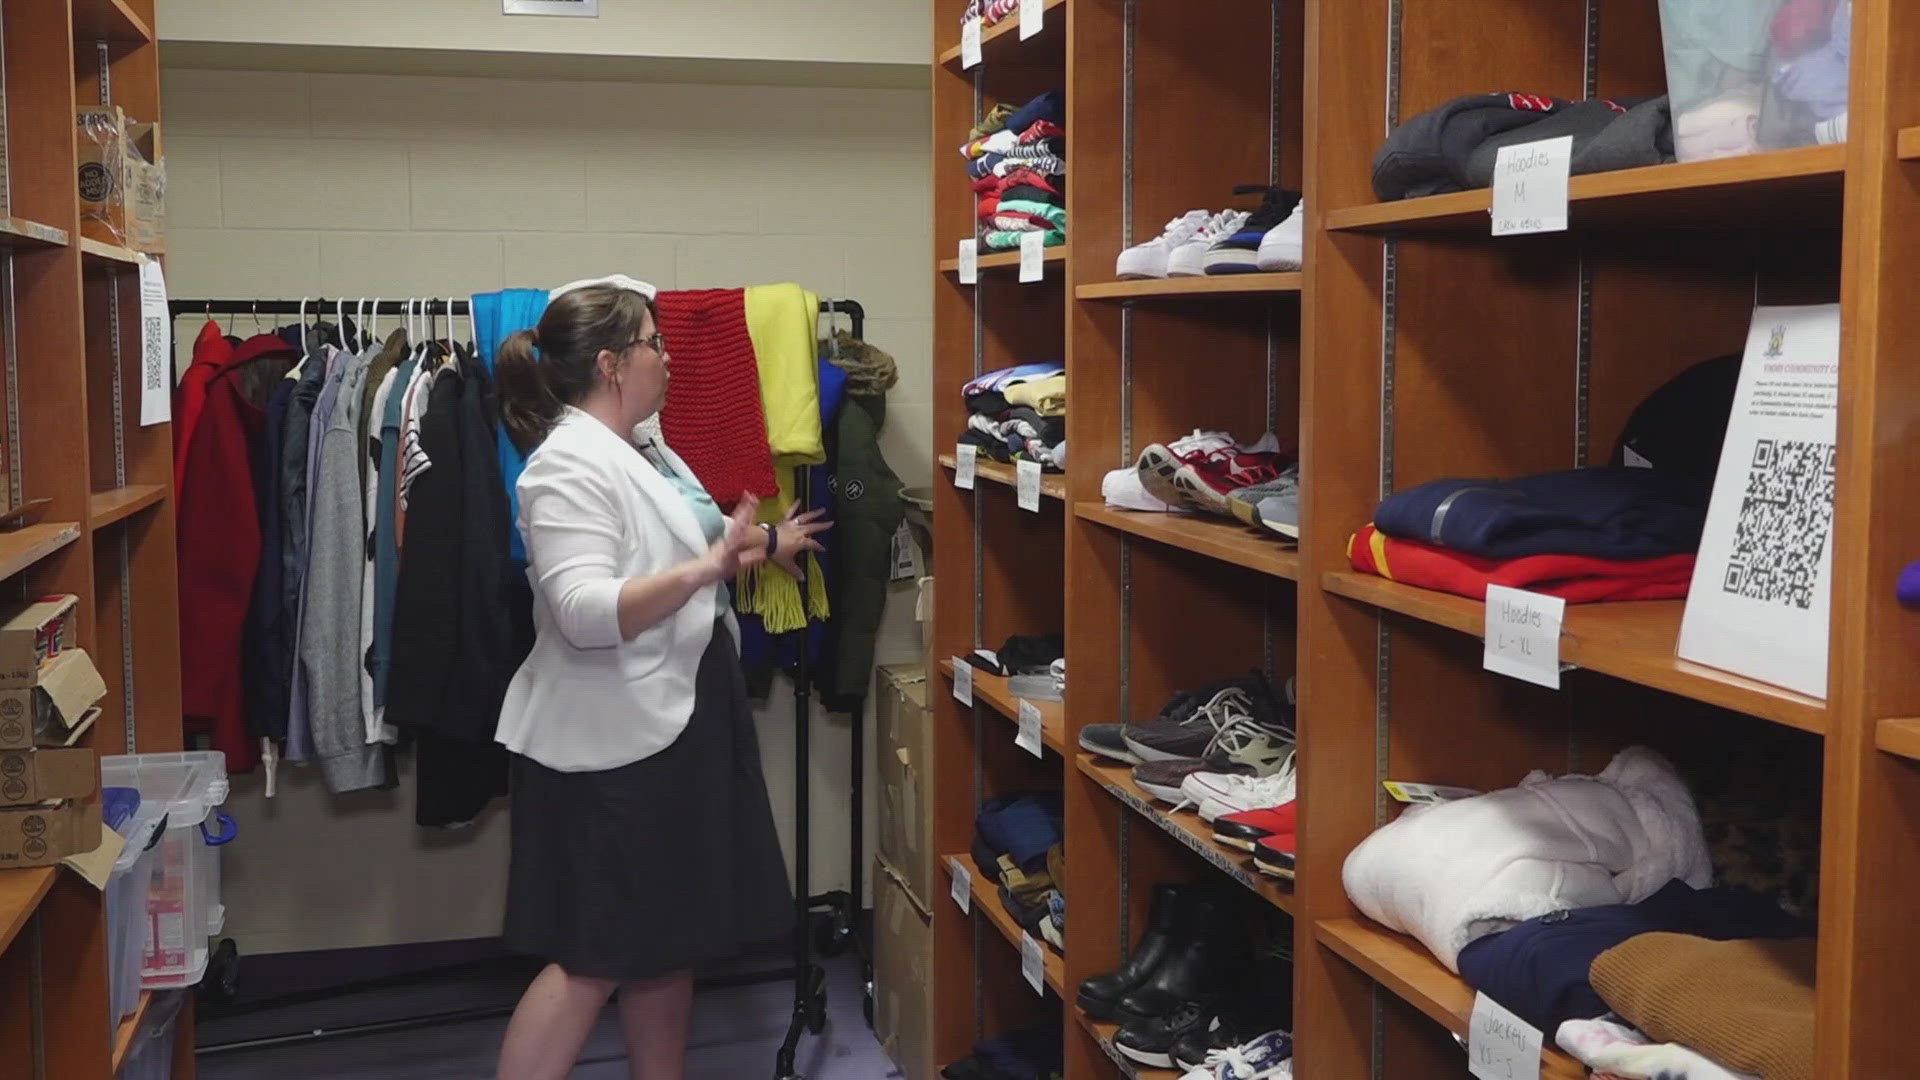 "Kids aren't learning if they're hungry, they're not learning if they're not comfortable in their clothes," said Jordyn Black, the teacher behind the care closet.